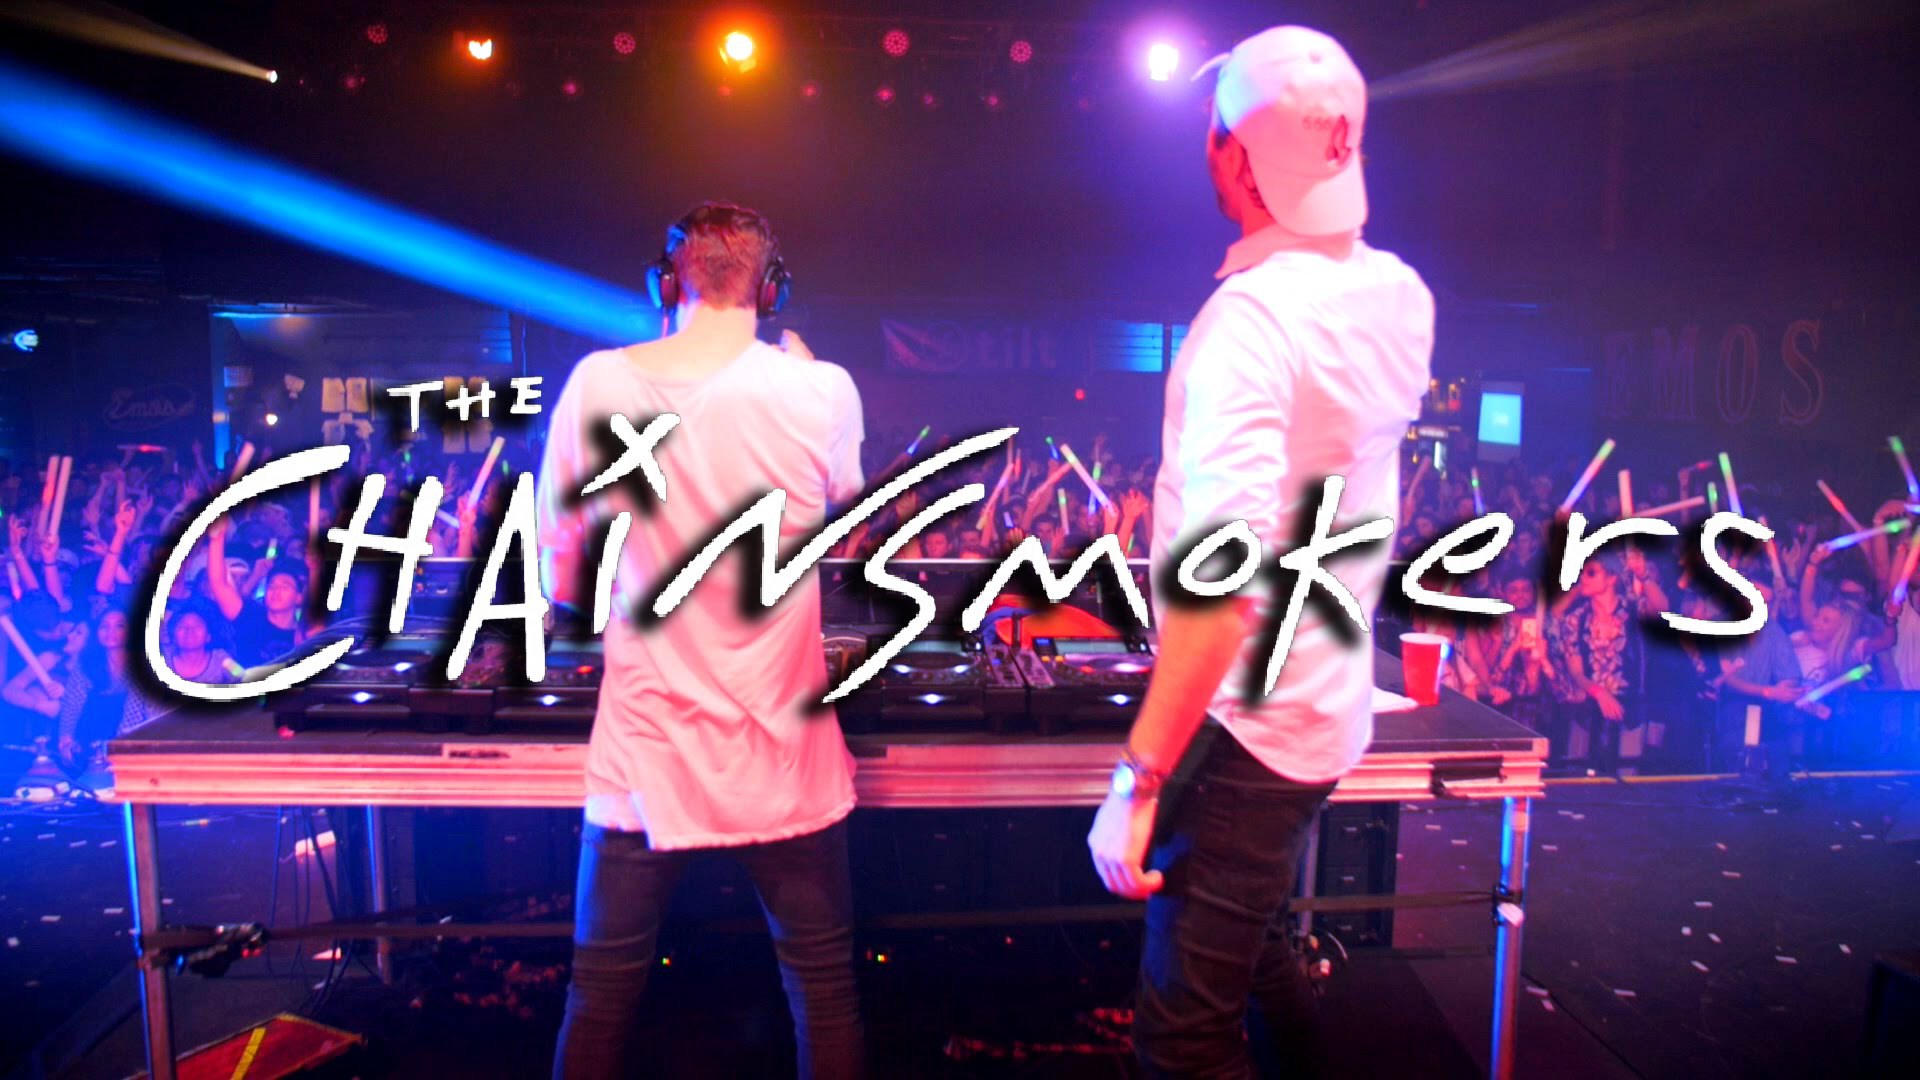 The Chainsmokers Wallpapers